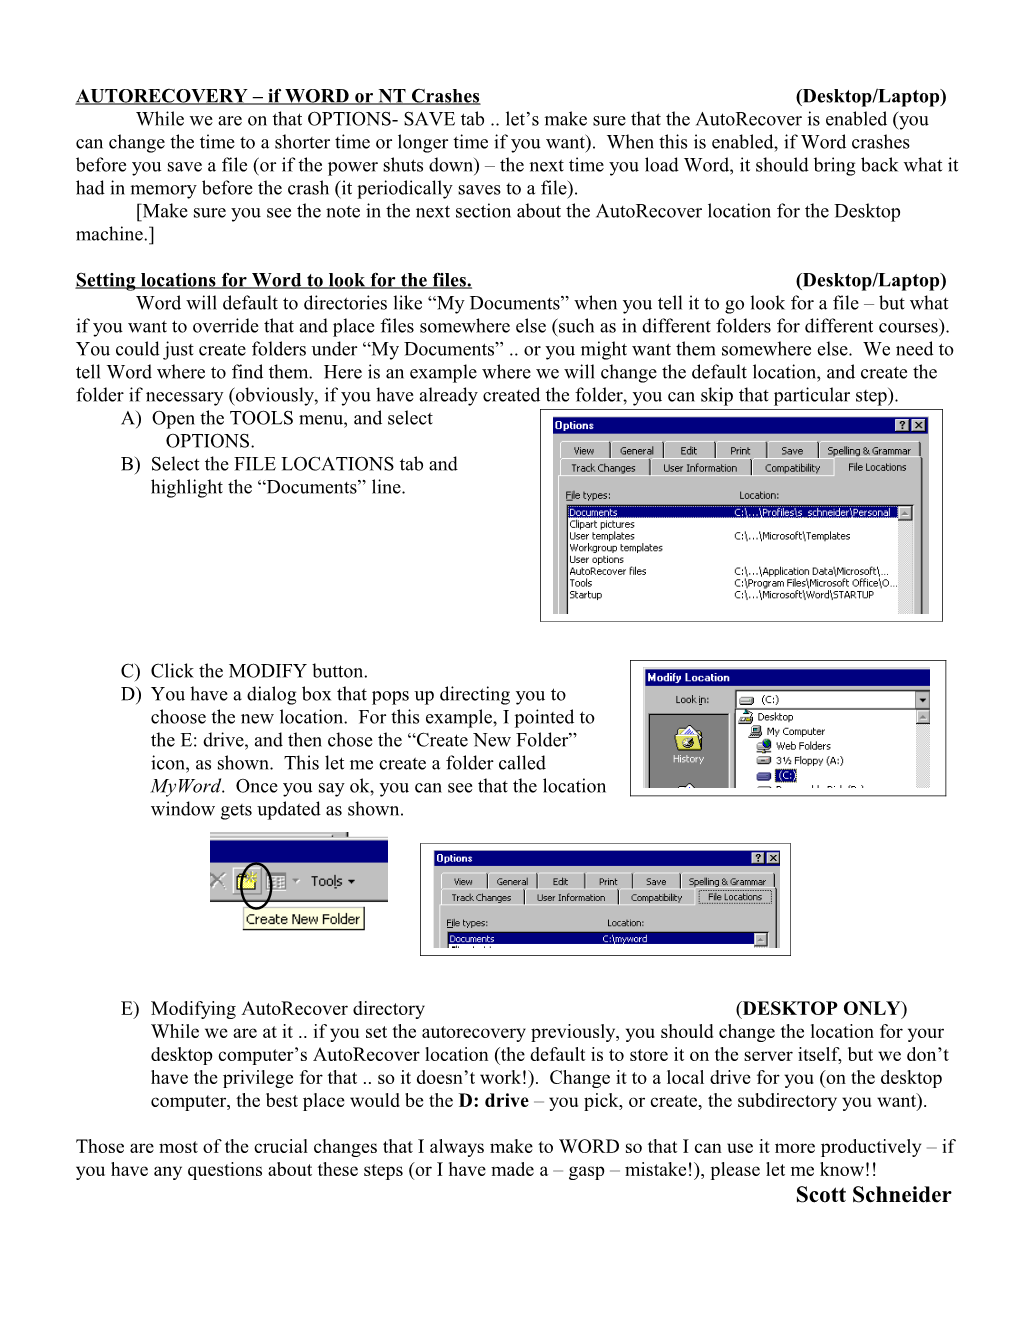 Customizing Word (97/2000) with the Schneider Options Version : 1/24/2001